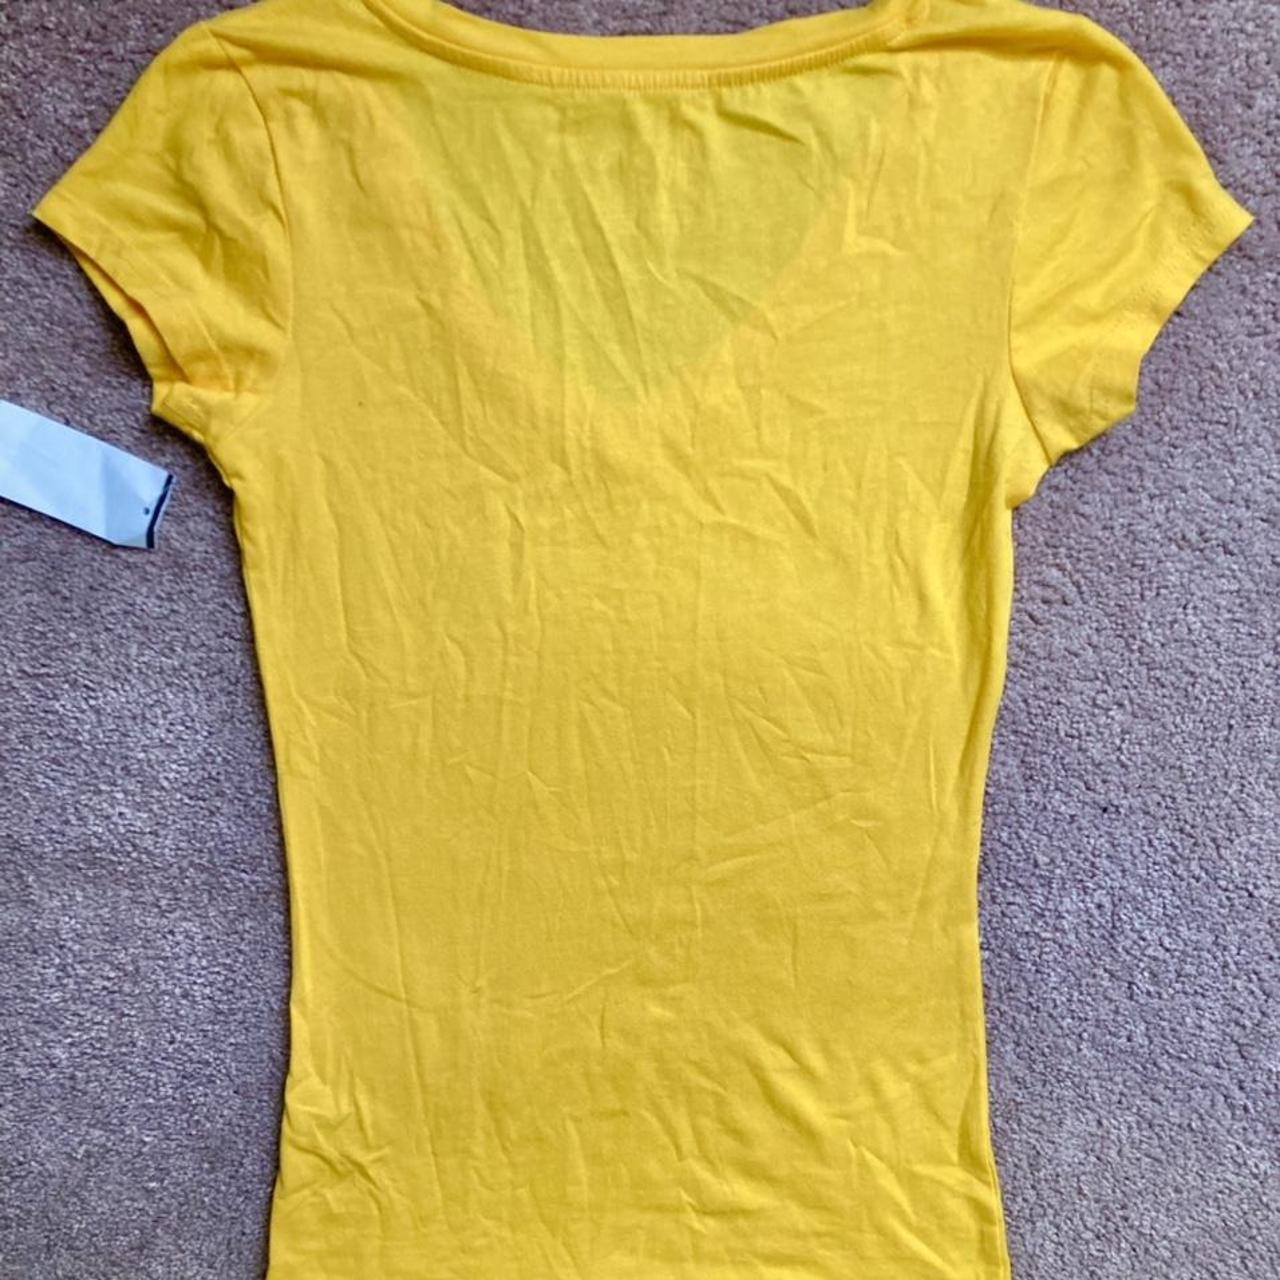 Product Image 3 - ☀️ Womens Basic Yellow Fitted